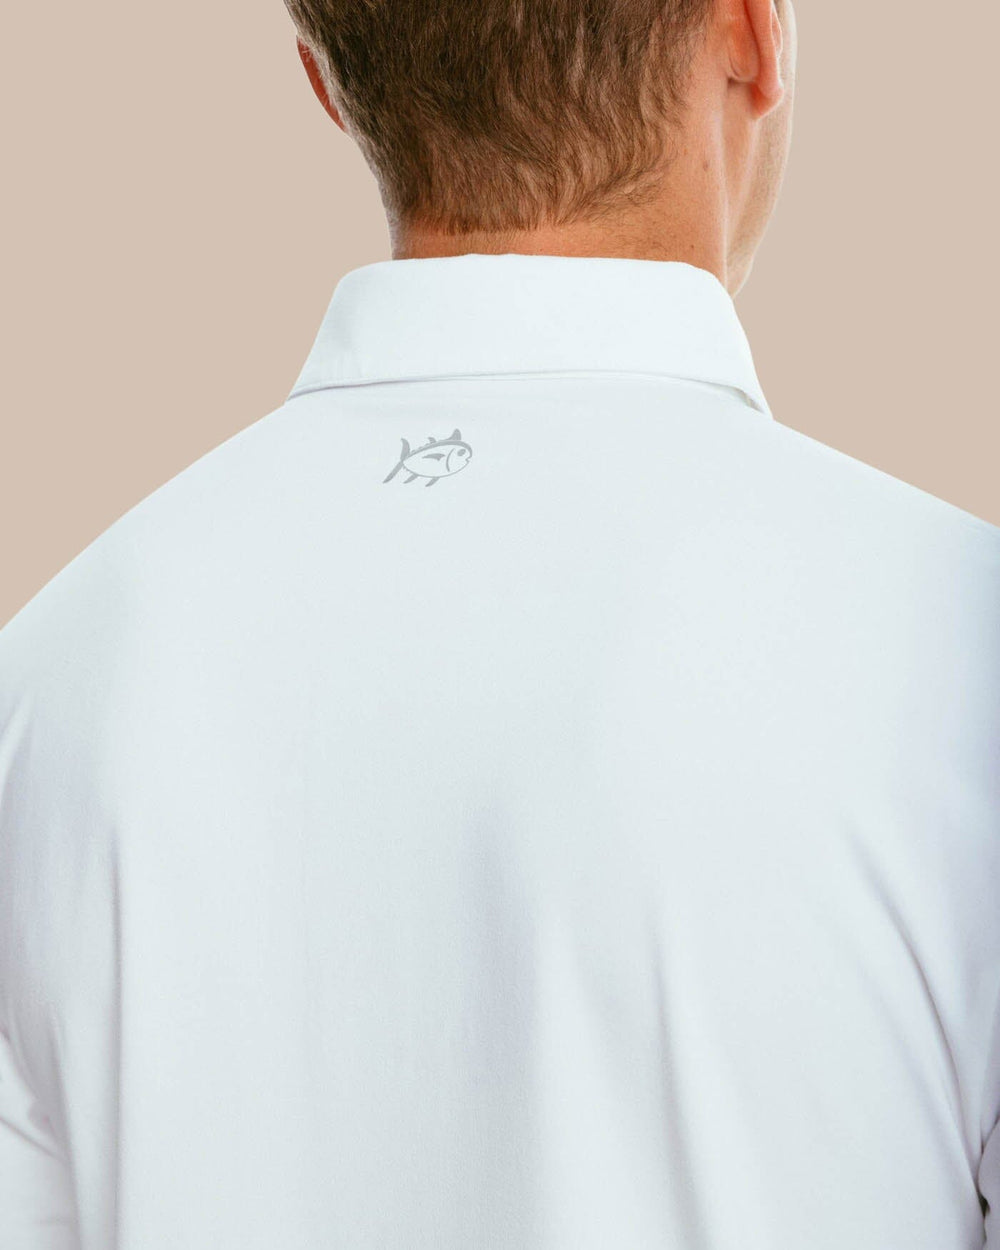 The yoke of the Men's Ryder Long Sleeve Performance Polo Shirt by Southern Tide - Classic White